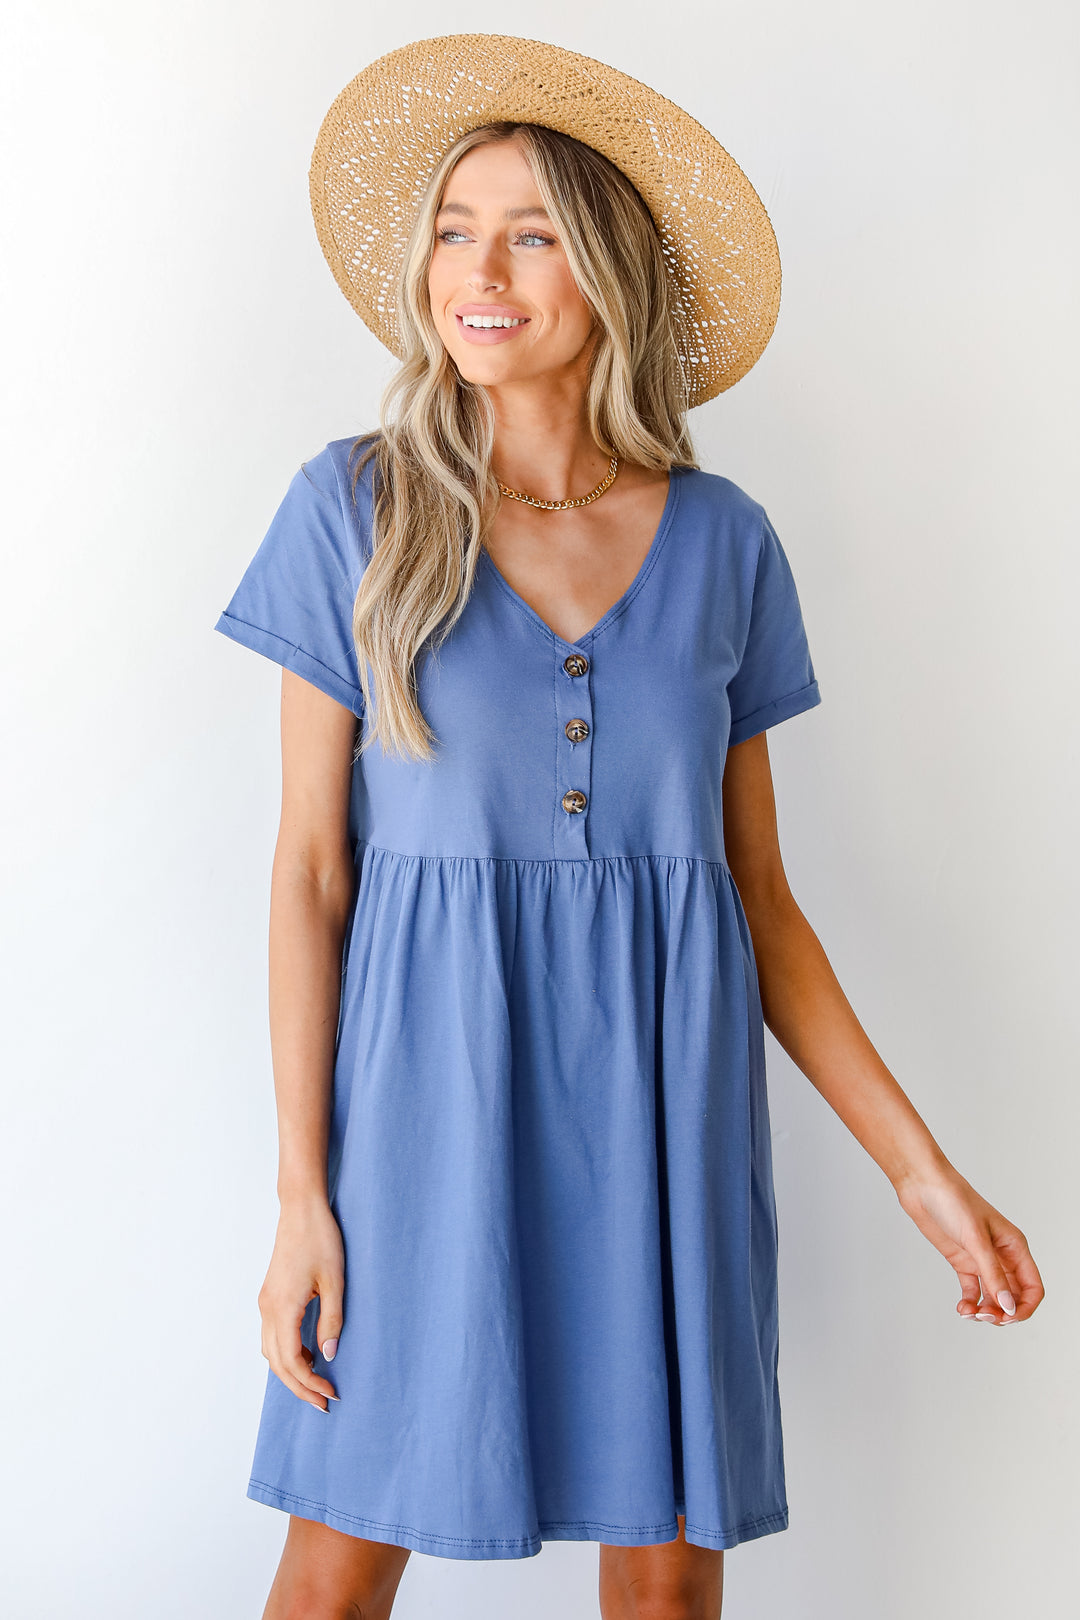 Button Front Babydoll Dress in blue on model